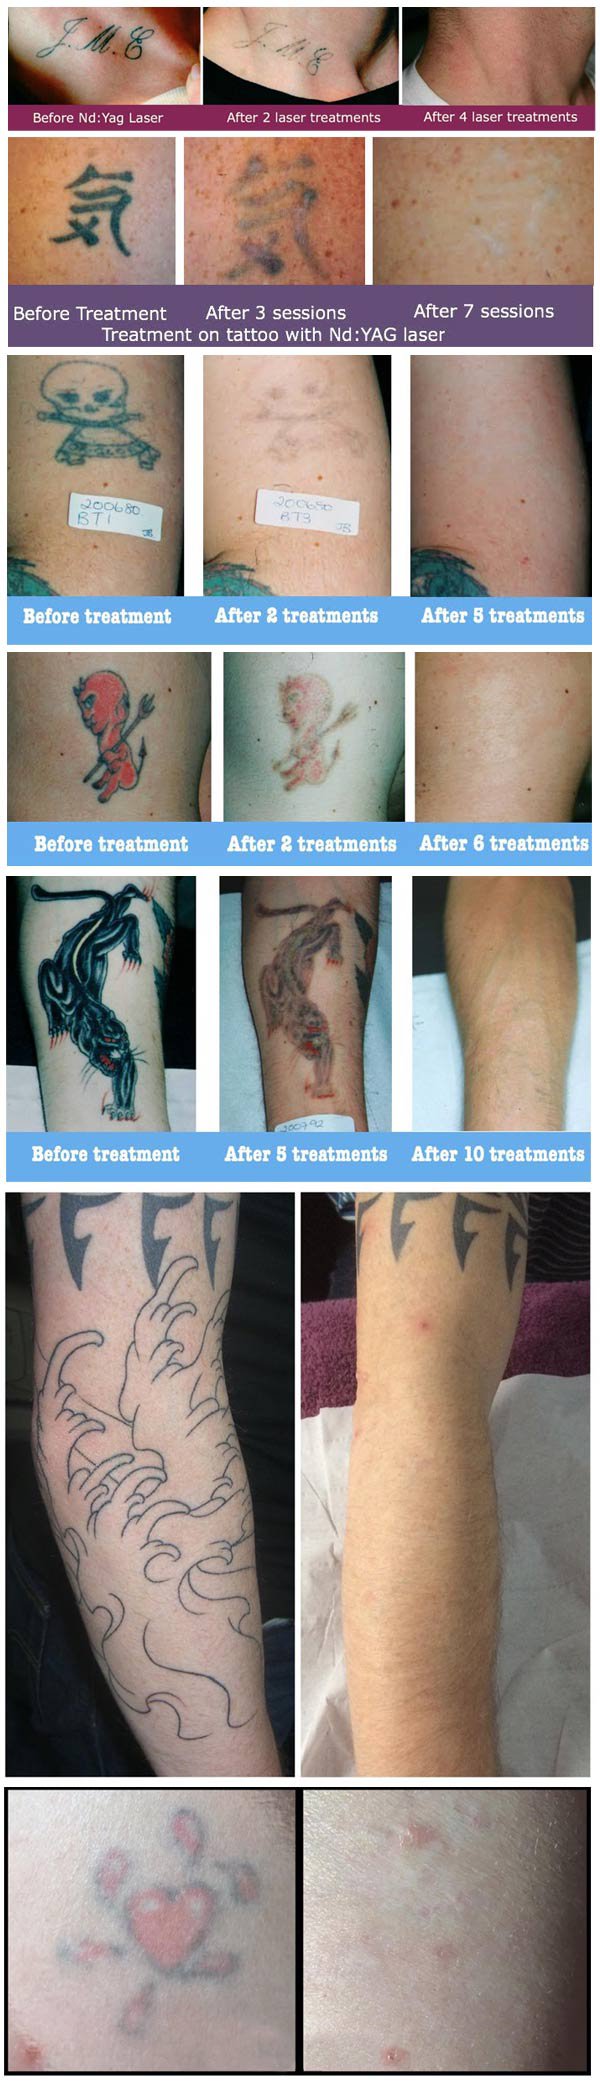 Laser Tattoo Removal vs Tattoo Removal Creams - Whats the verdict?